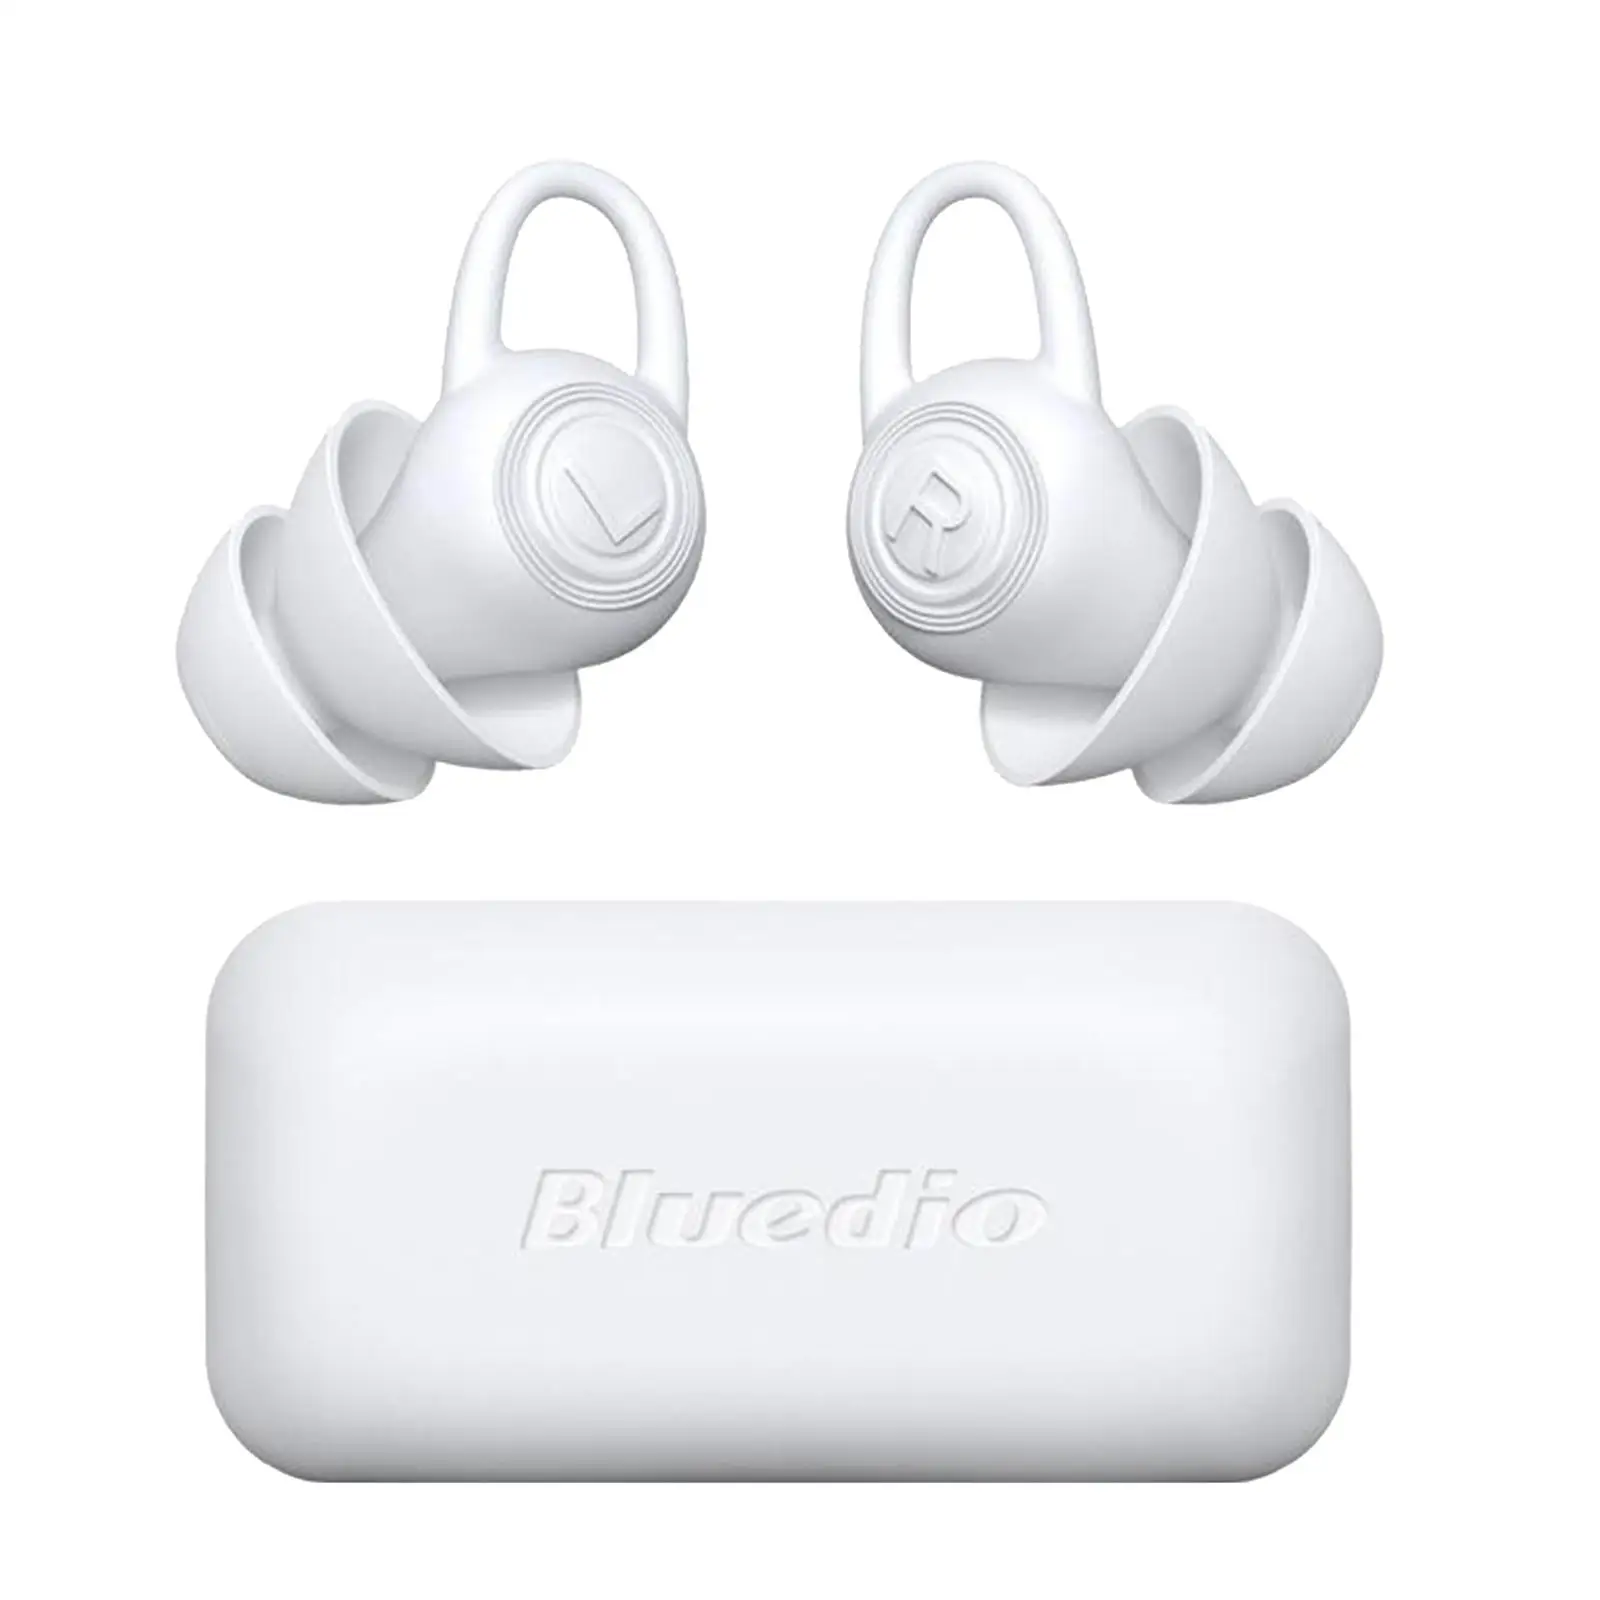 1 Pair Silicone Ear Noise Cancelling for Sleeping Swimming Concerts